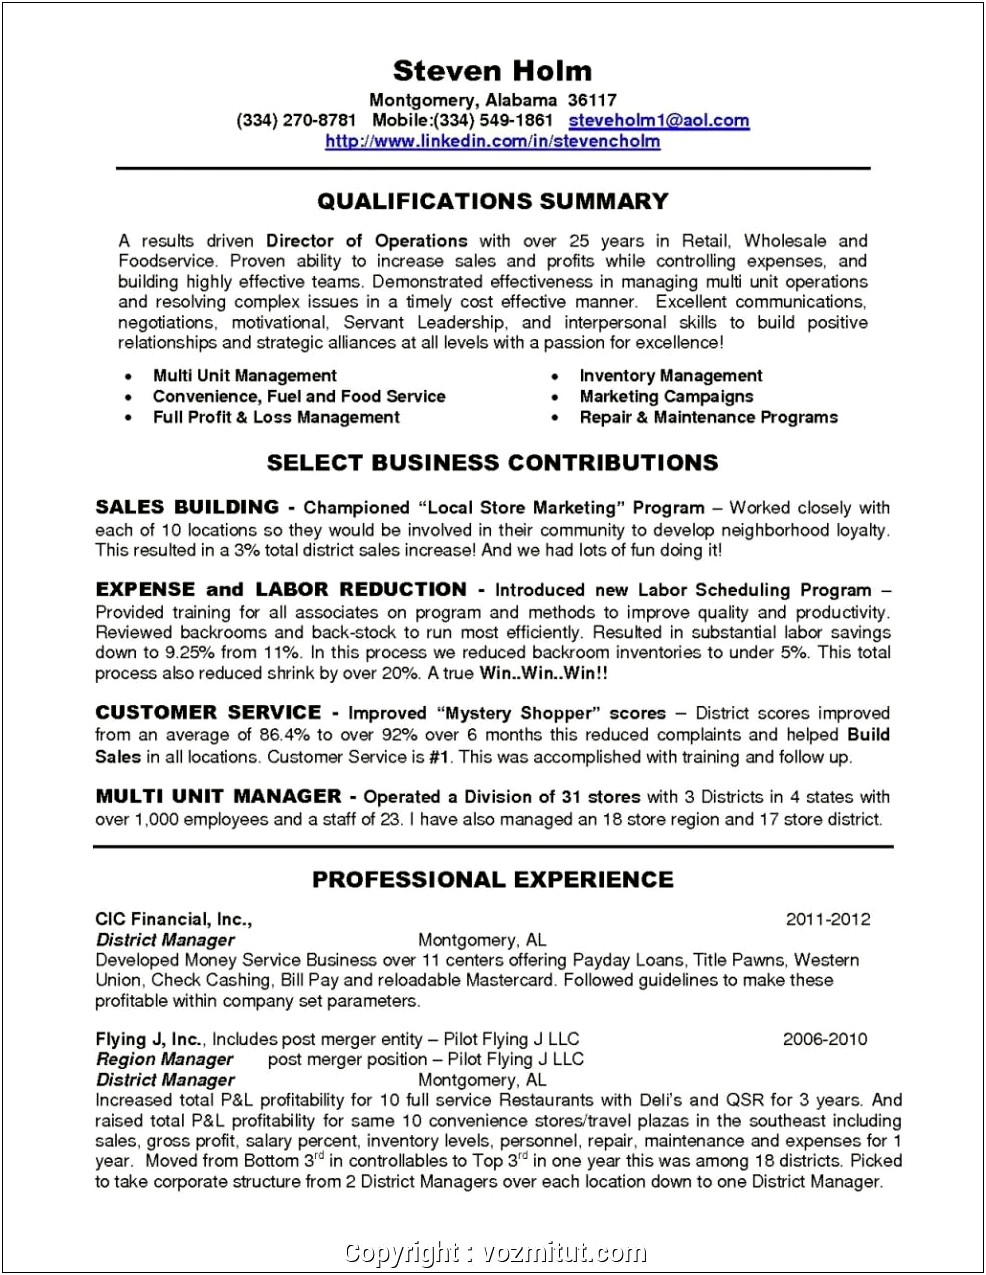 Resume Samples For Those In Hospitality Industry